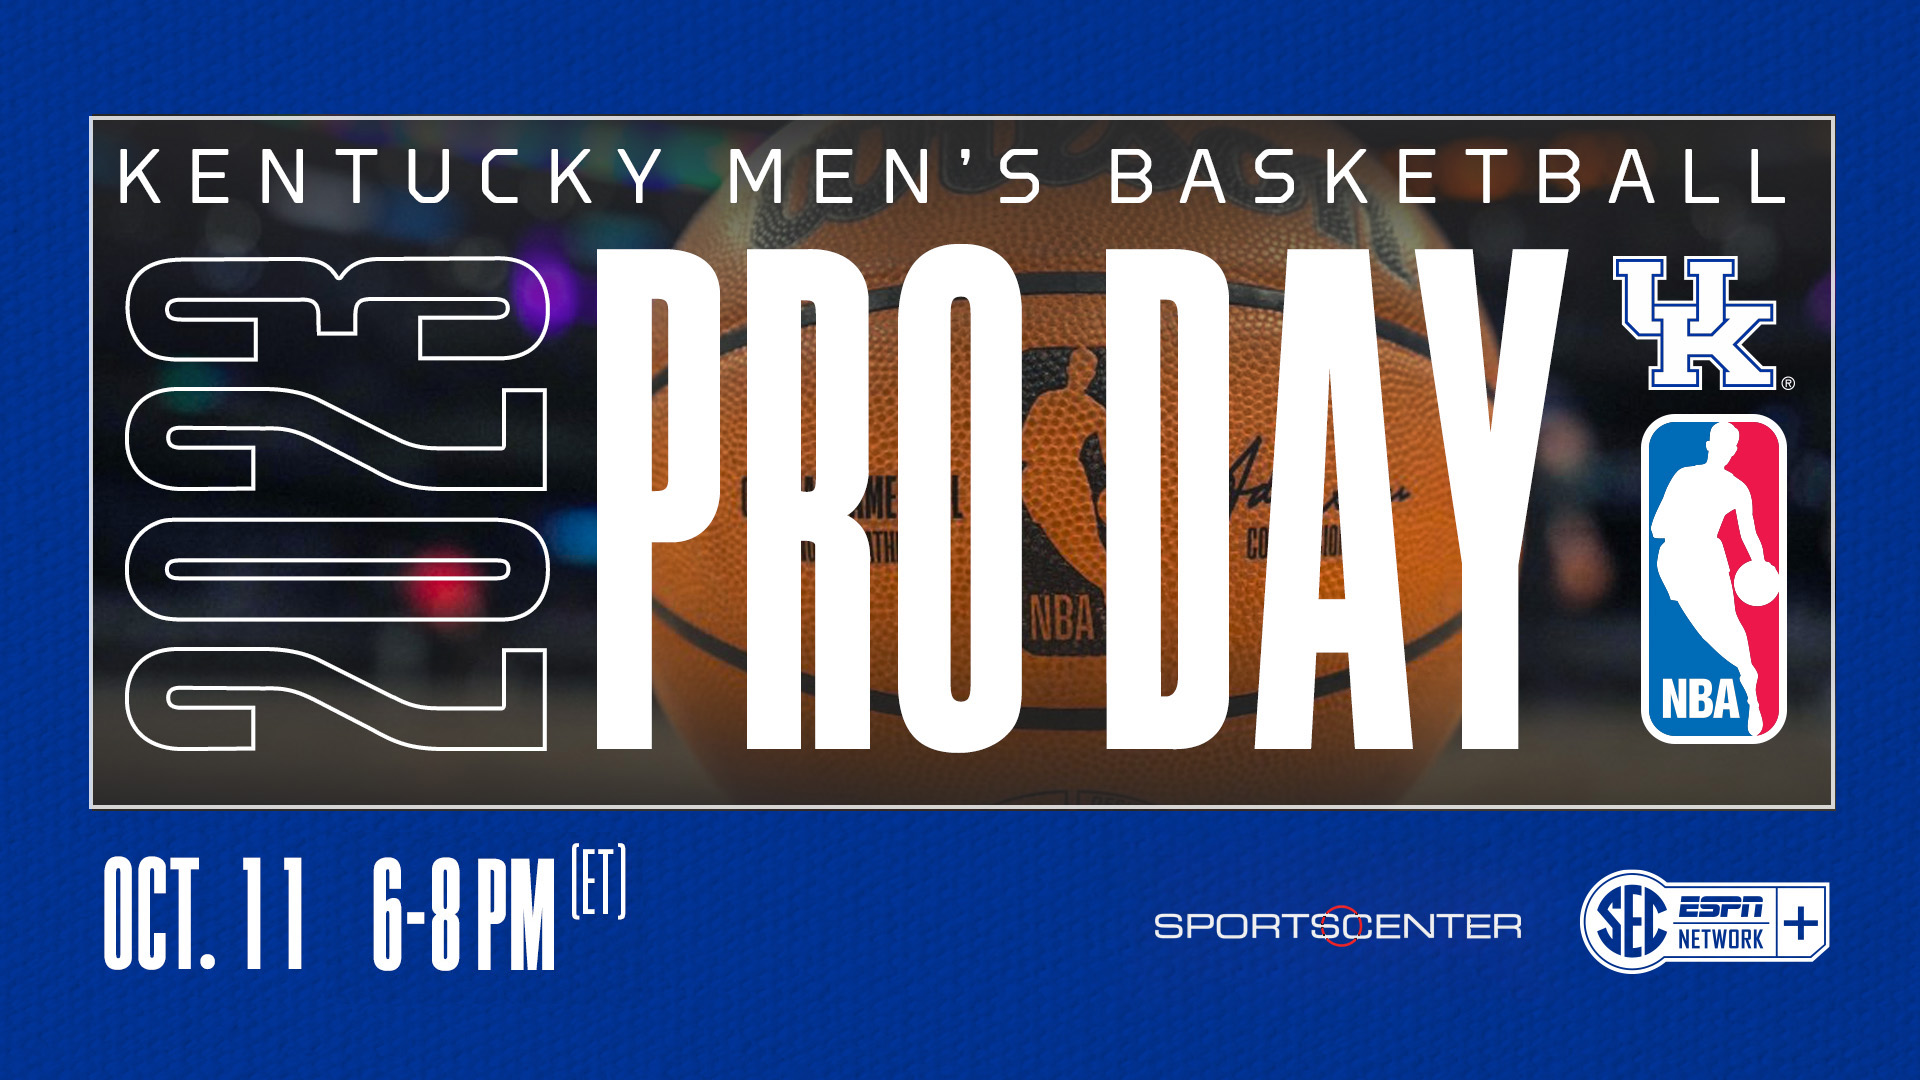 UK Men’s Basketball Pro Day Slated for Oct. 11 in Rupp Arena